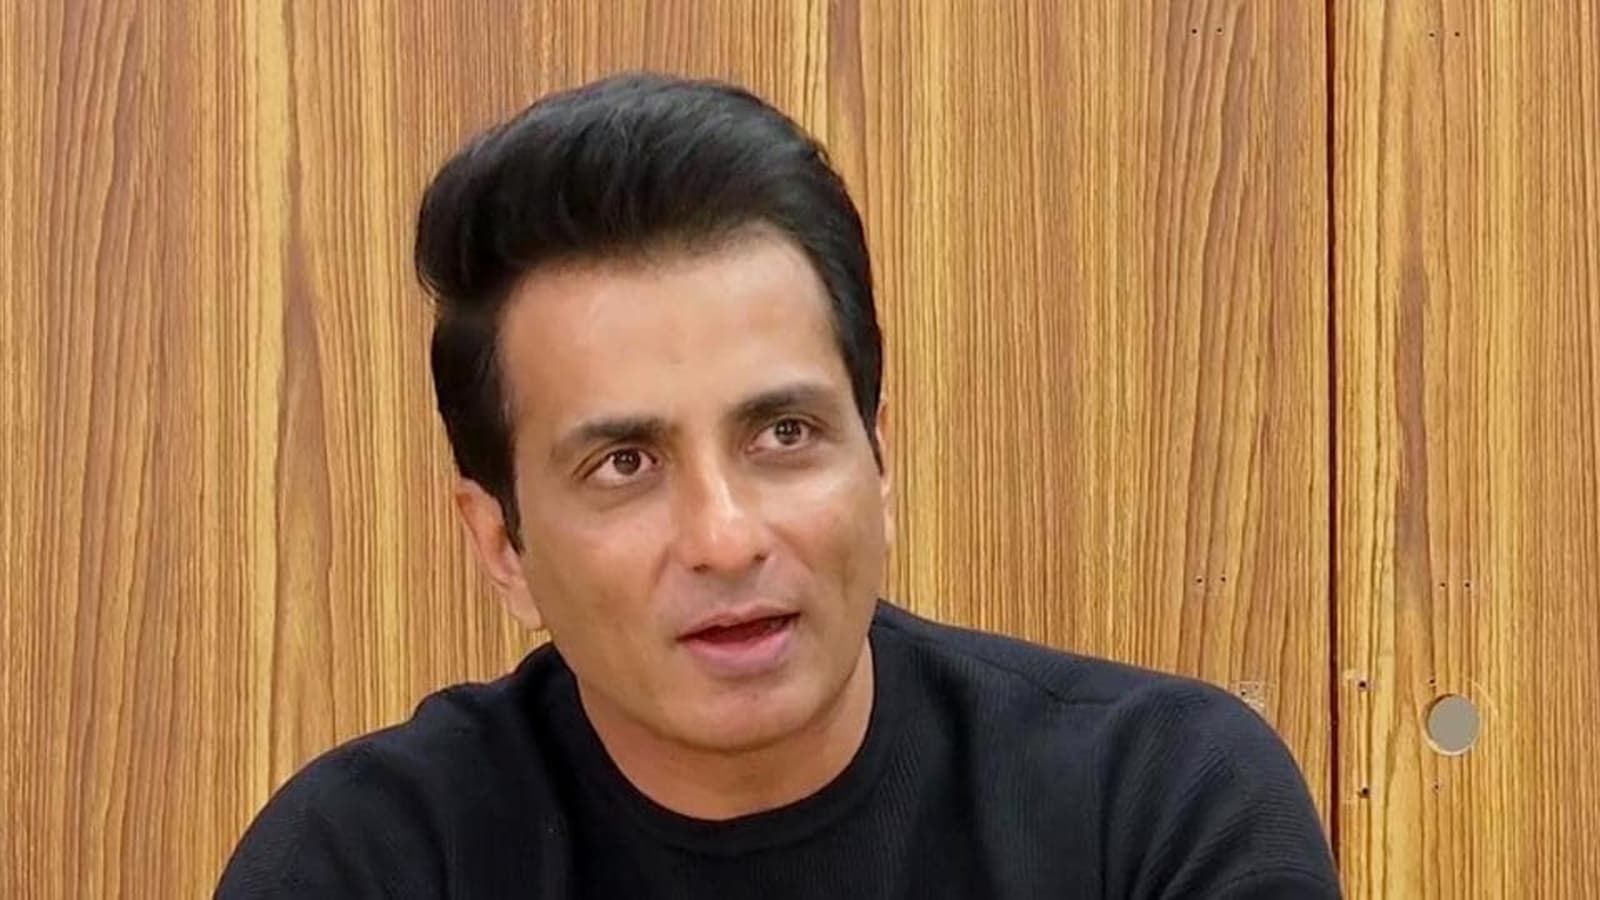 Sonu Sood, under scrutiny for tax evasion, breaks silence: 'Every rupee is awaiting its turn to save a precious life' | Bollywood - Hindustan Times